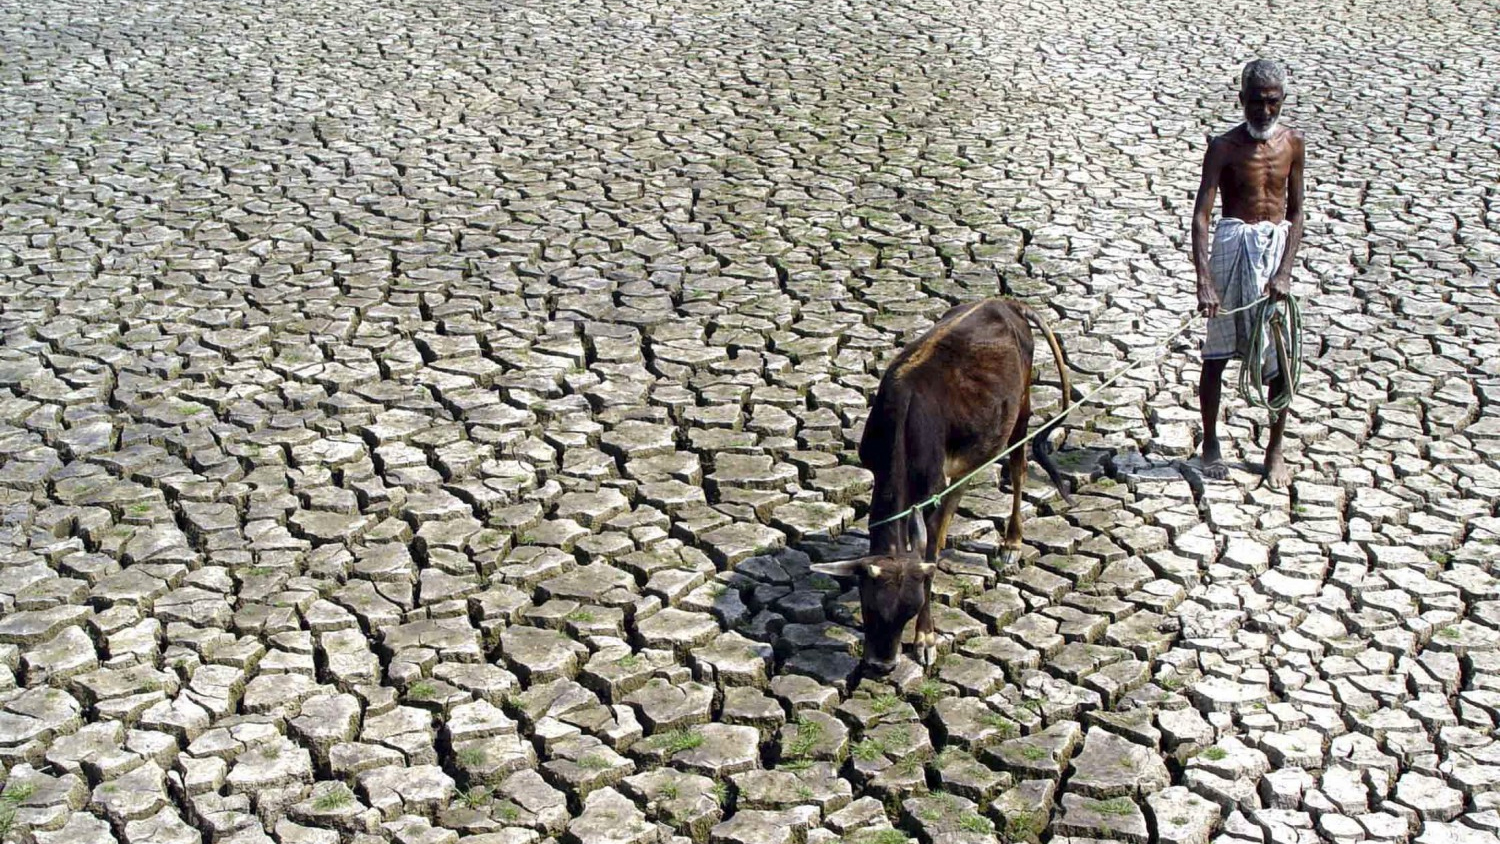 An Indian farmer walks with his hungry cow through a parched paddy field in Agartala, India, 2005.